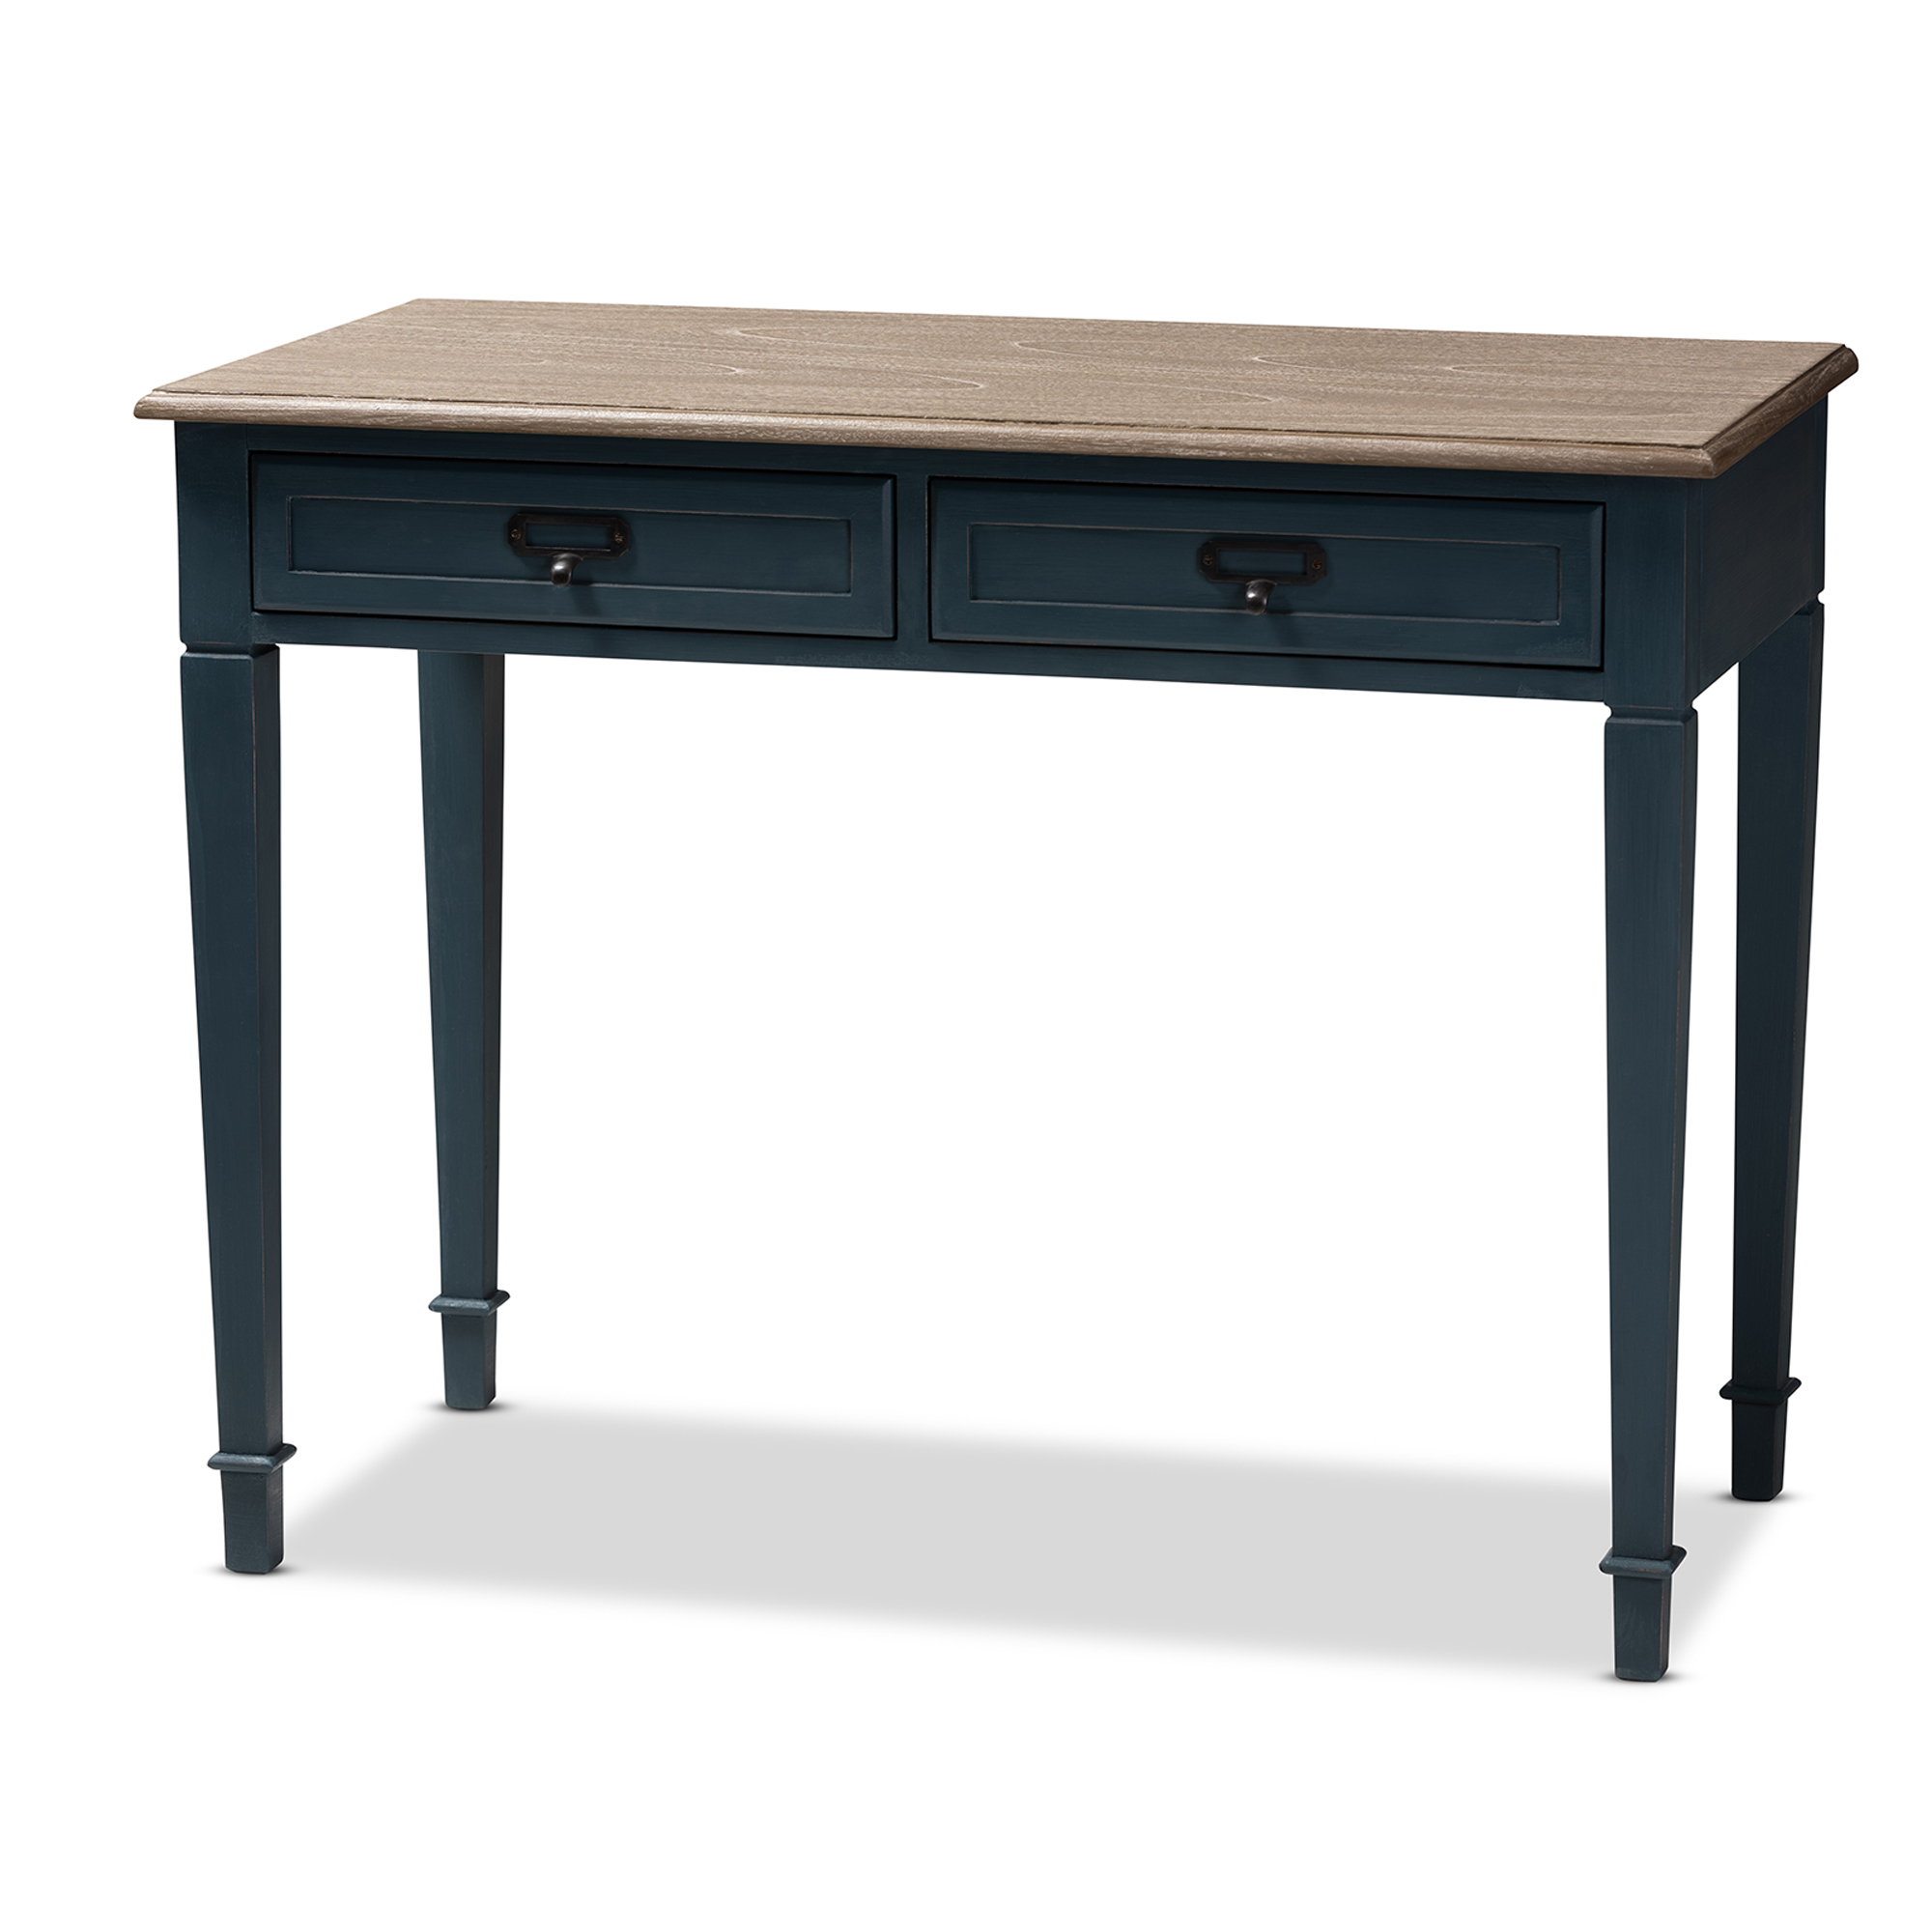 Baxton Studio Dauphine French Provincial Spruce Blue Accent Writing Desk